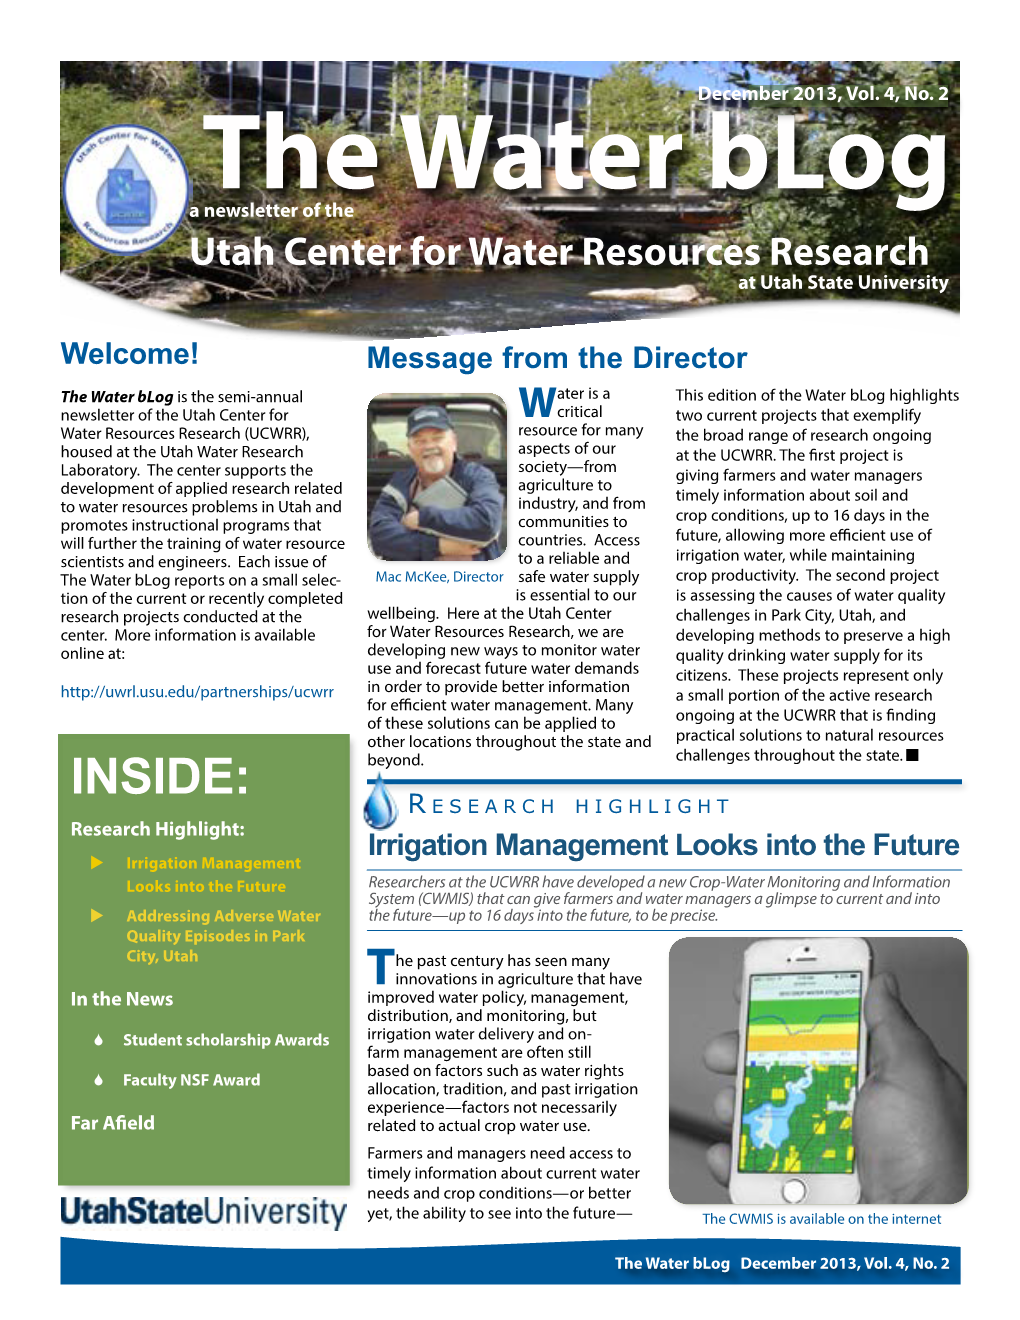 The Water Blog a Newsletter of the Utah Center for Water Resources Research at Utah State University